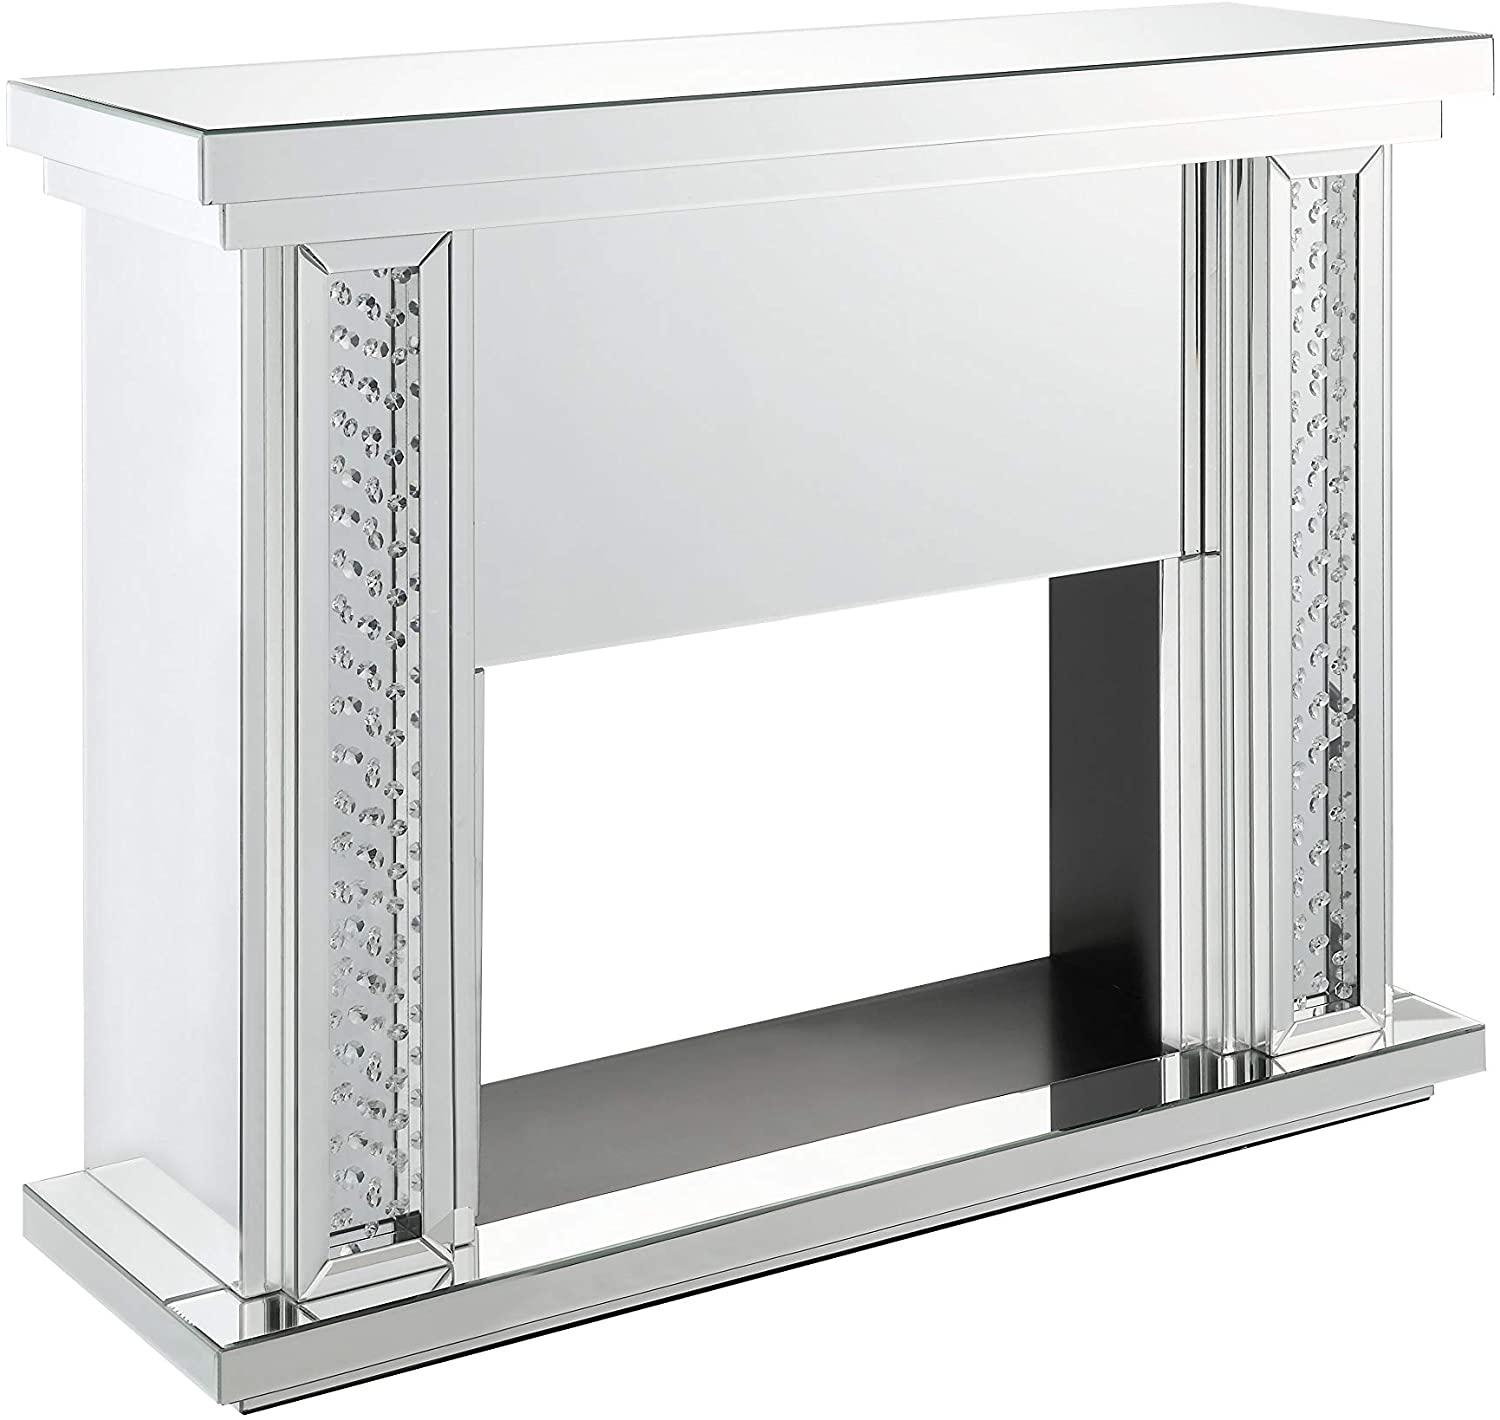 Modern Fireplace Nysa 90254 in Mirrored 